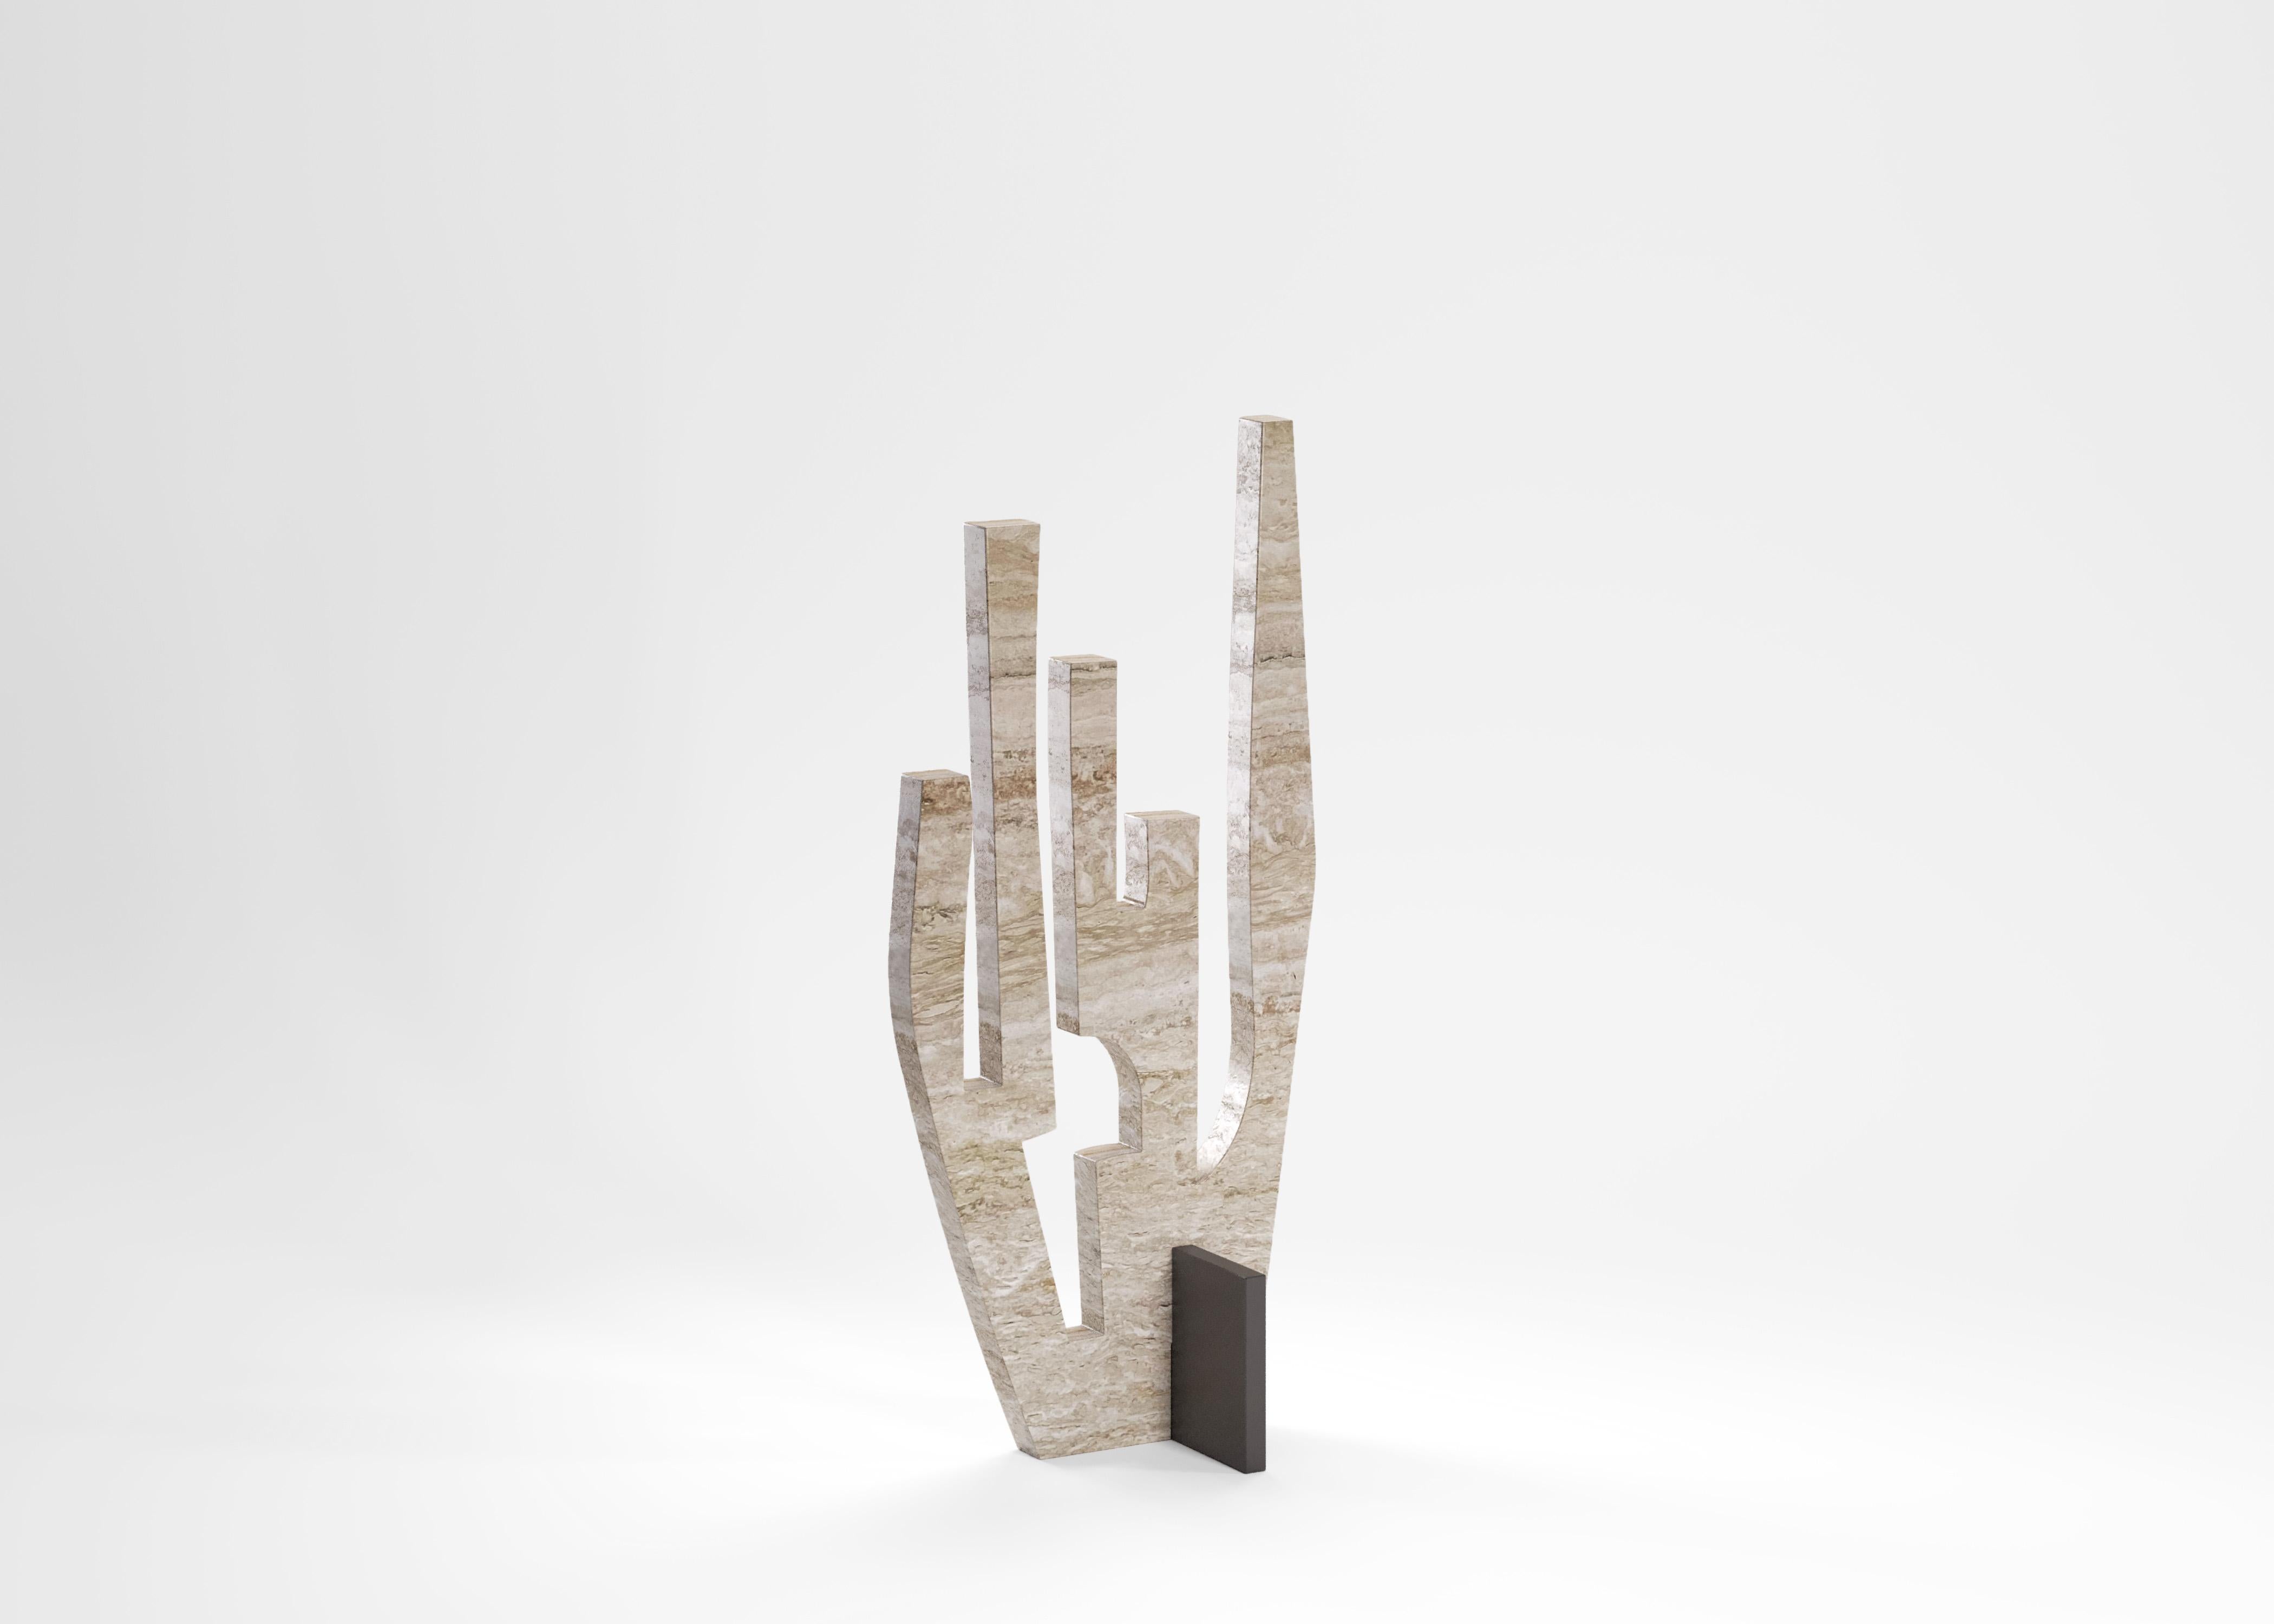 Coral sculpture by Edizione Limitata
Limited edition of 150 pieces. Signed and numbered.
Designers: Simone Fanciullacci 
Dimensions: H 42 × W 12 × L 19 cm
Materials: Travertine, metal

Edizione Limitata, that is to say “Limited Edition”, is a